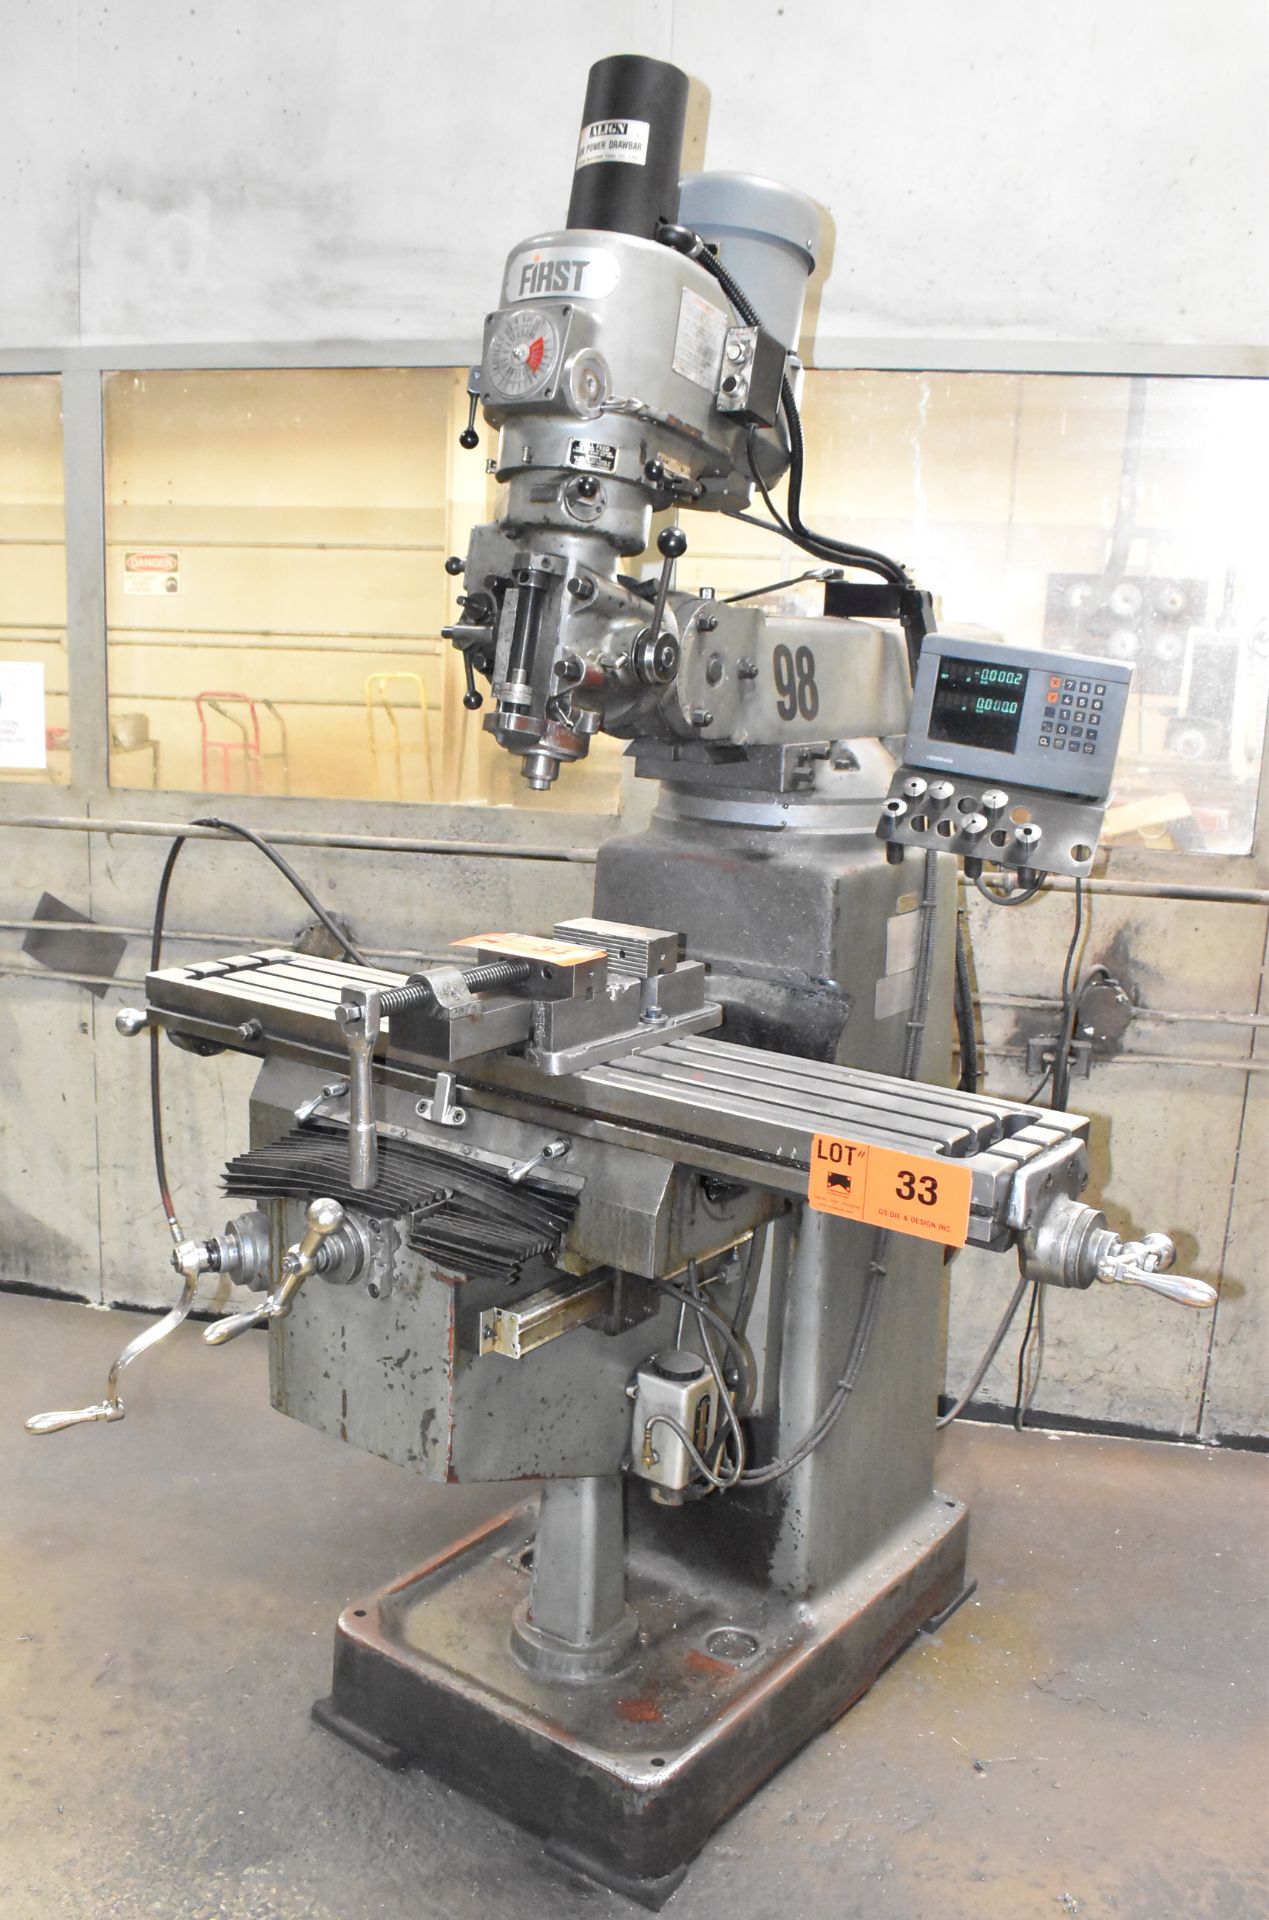 FIRST LC-185VS VERTICAL MILLING MACHINES WITH 50"X10" TABLE, SPEEDS TO 4500 RPM, ALIGN AIR POWER